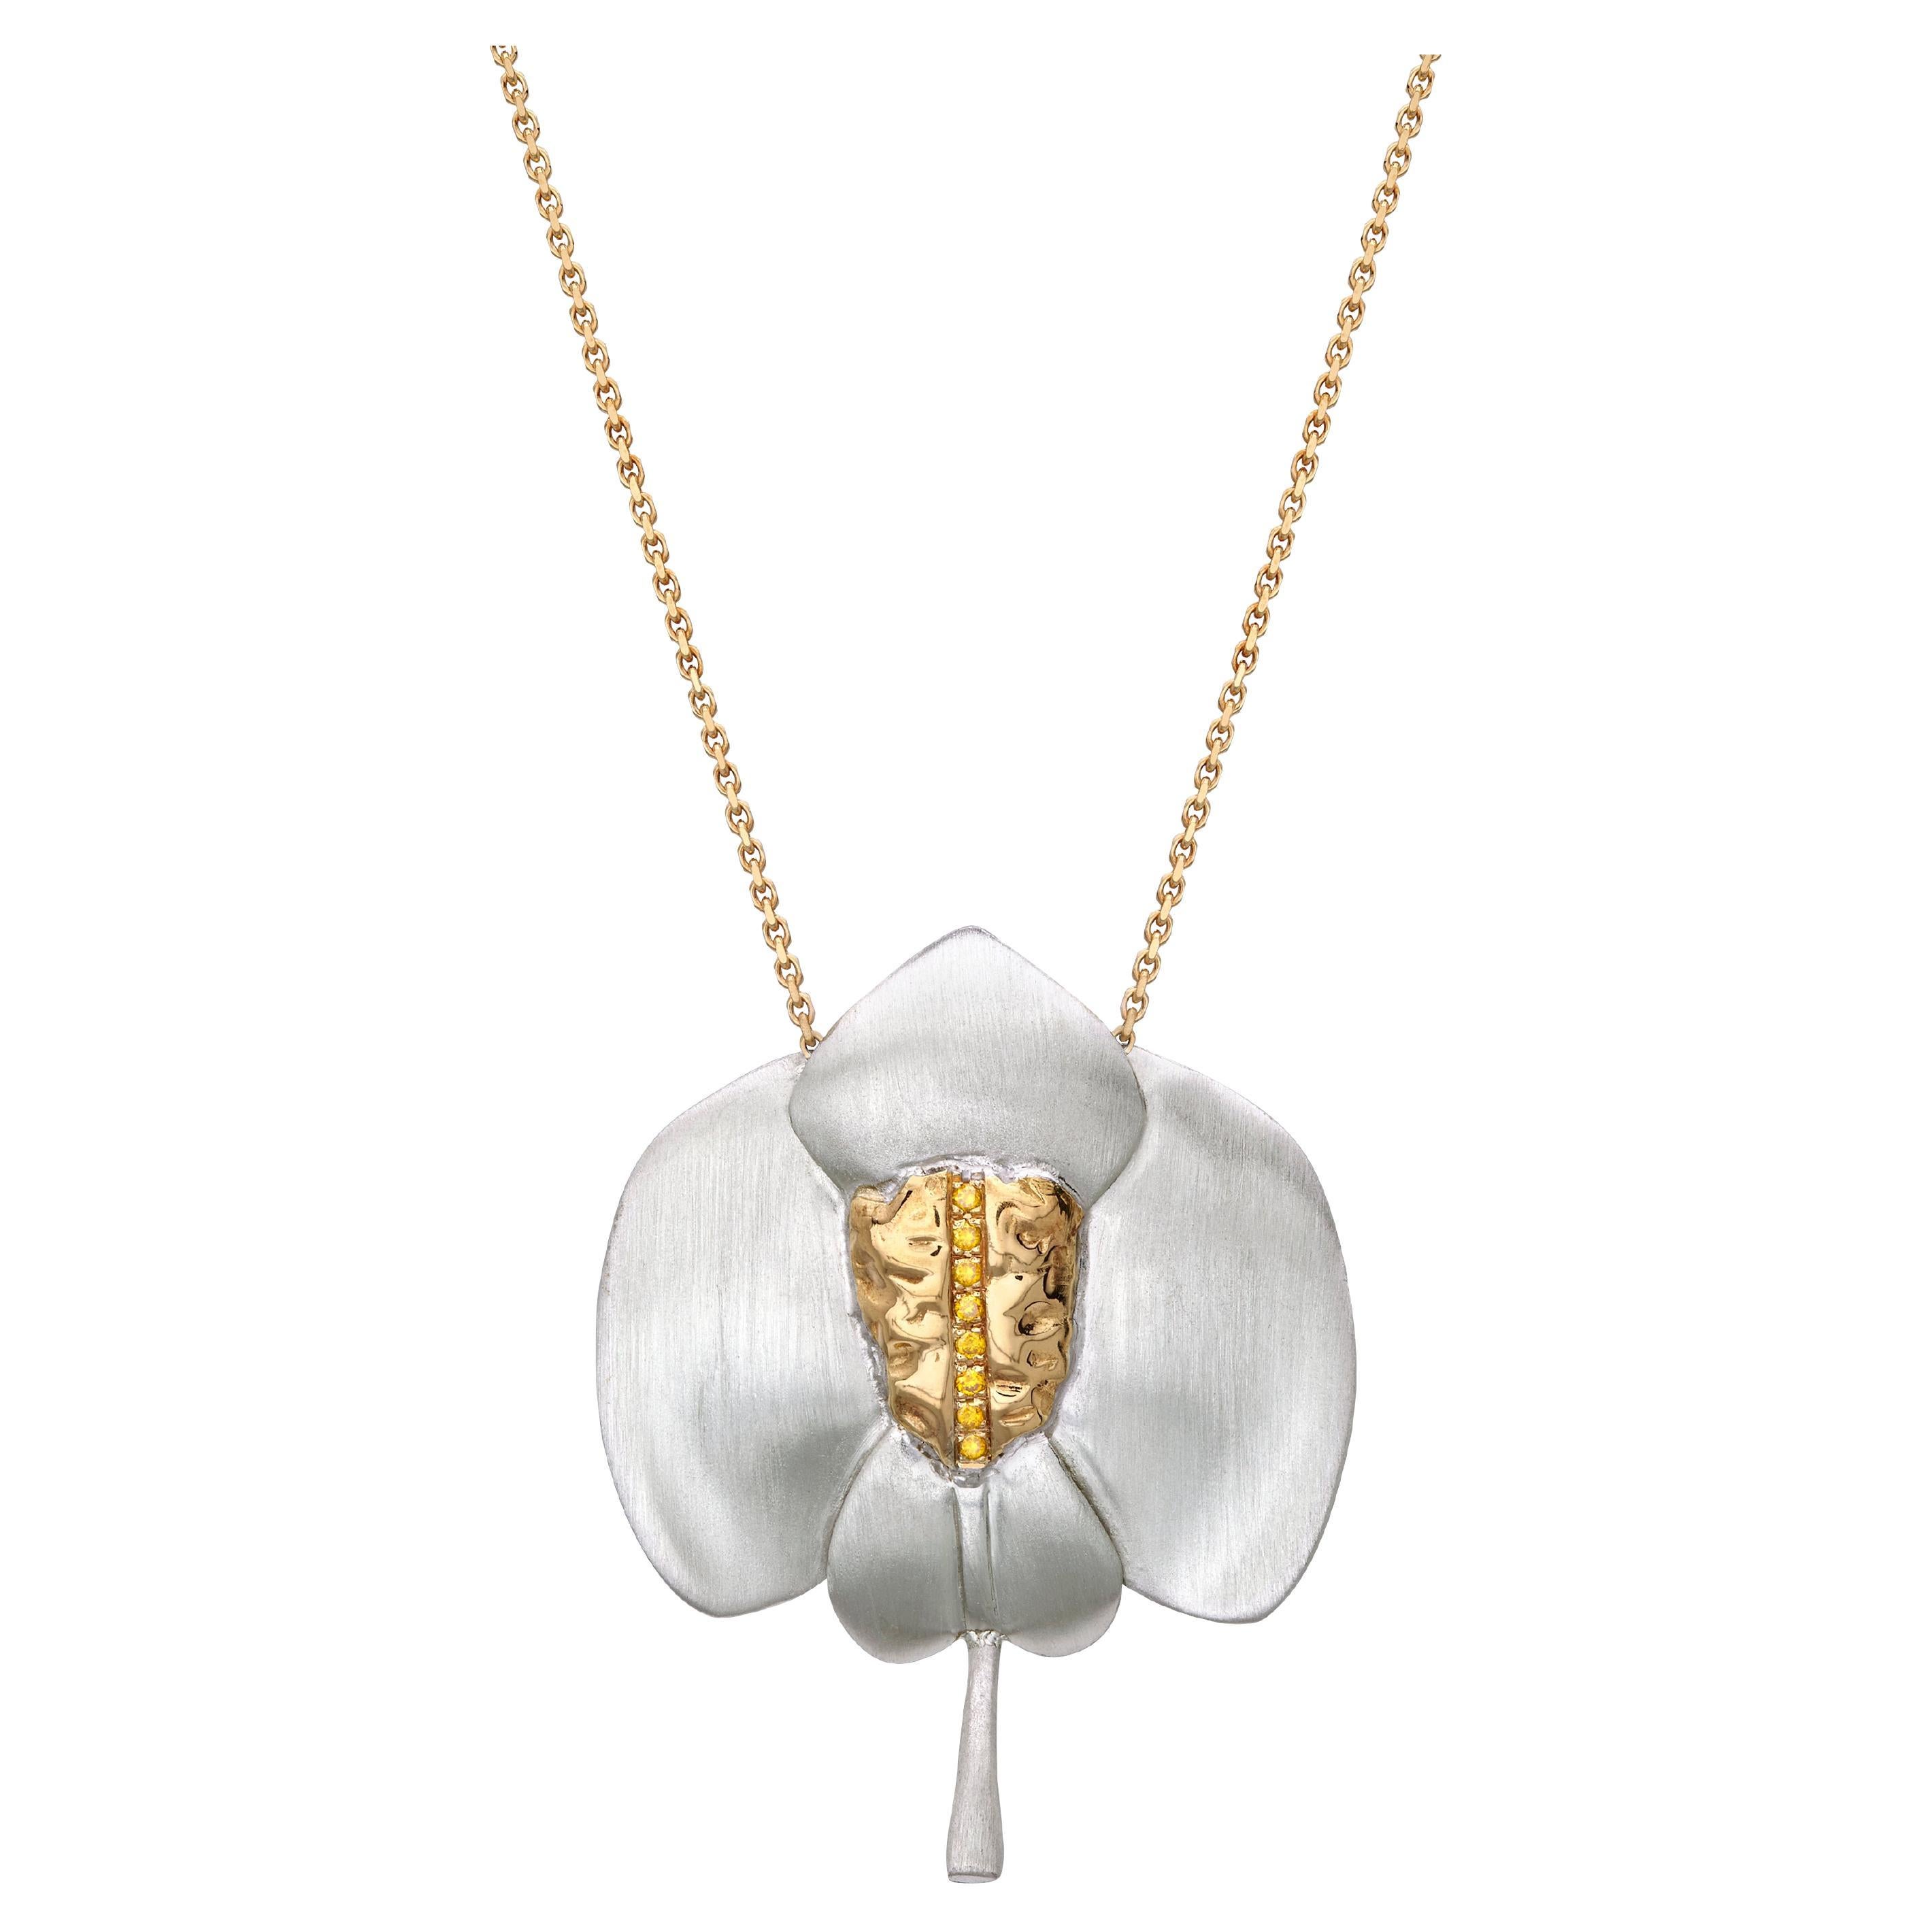 Metallaxis Artistic Necklace in Silver 925 and 18Kt Gold with Yellow Diamonds For Sale